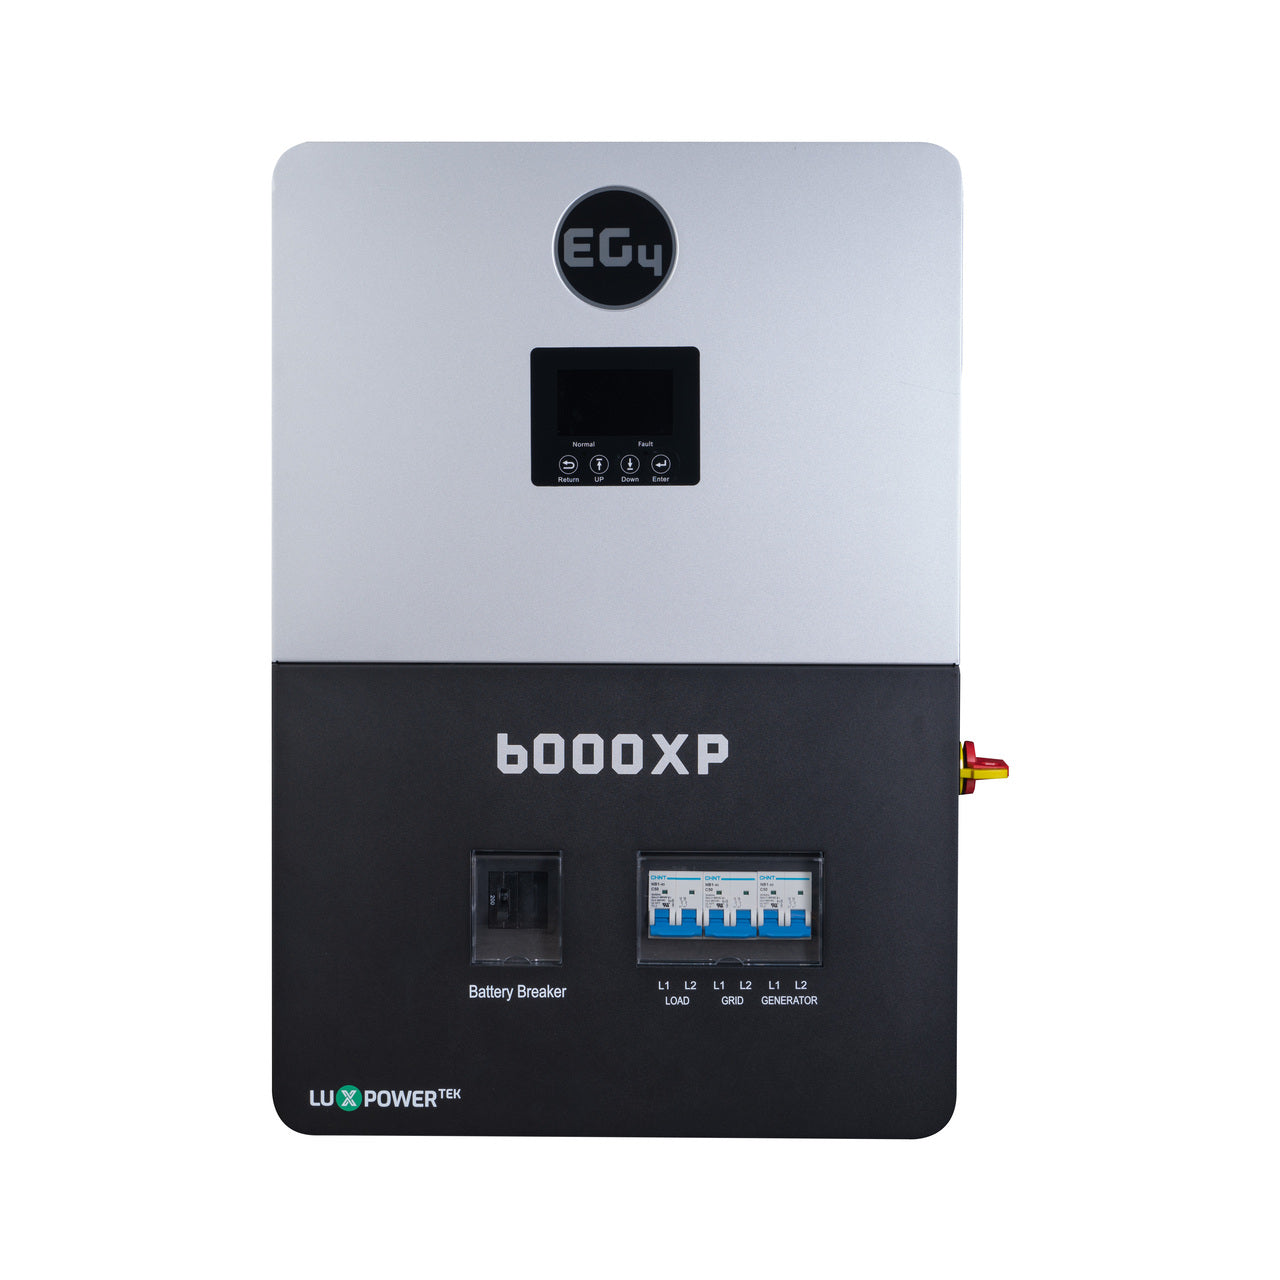 EG4 6000XP off-grid inverter, 48V split phase 120/240VAC, robust design for reliable energy conversion in remote locations.